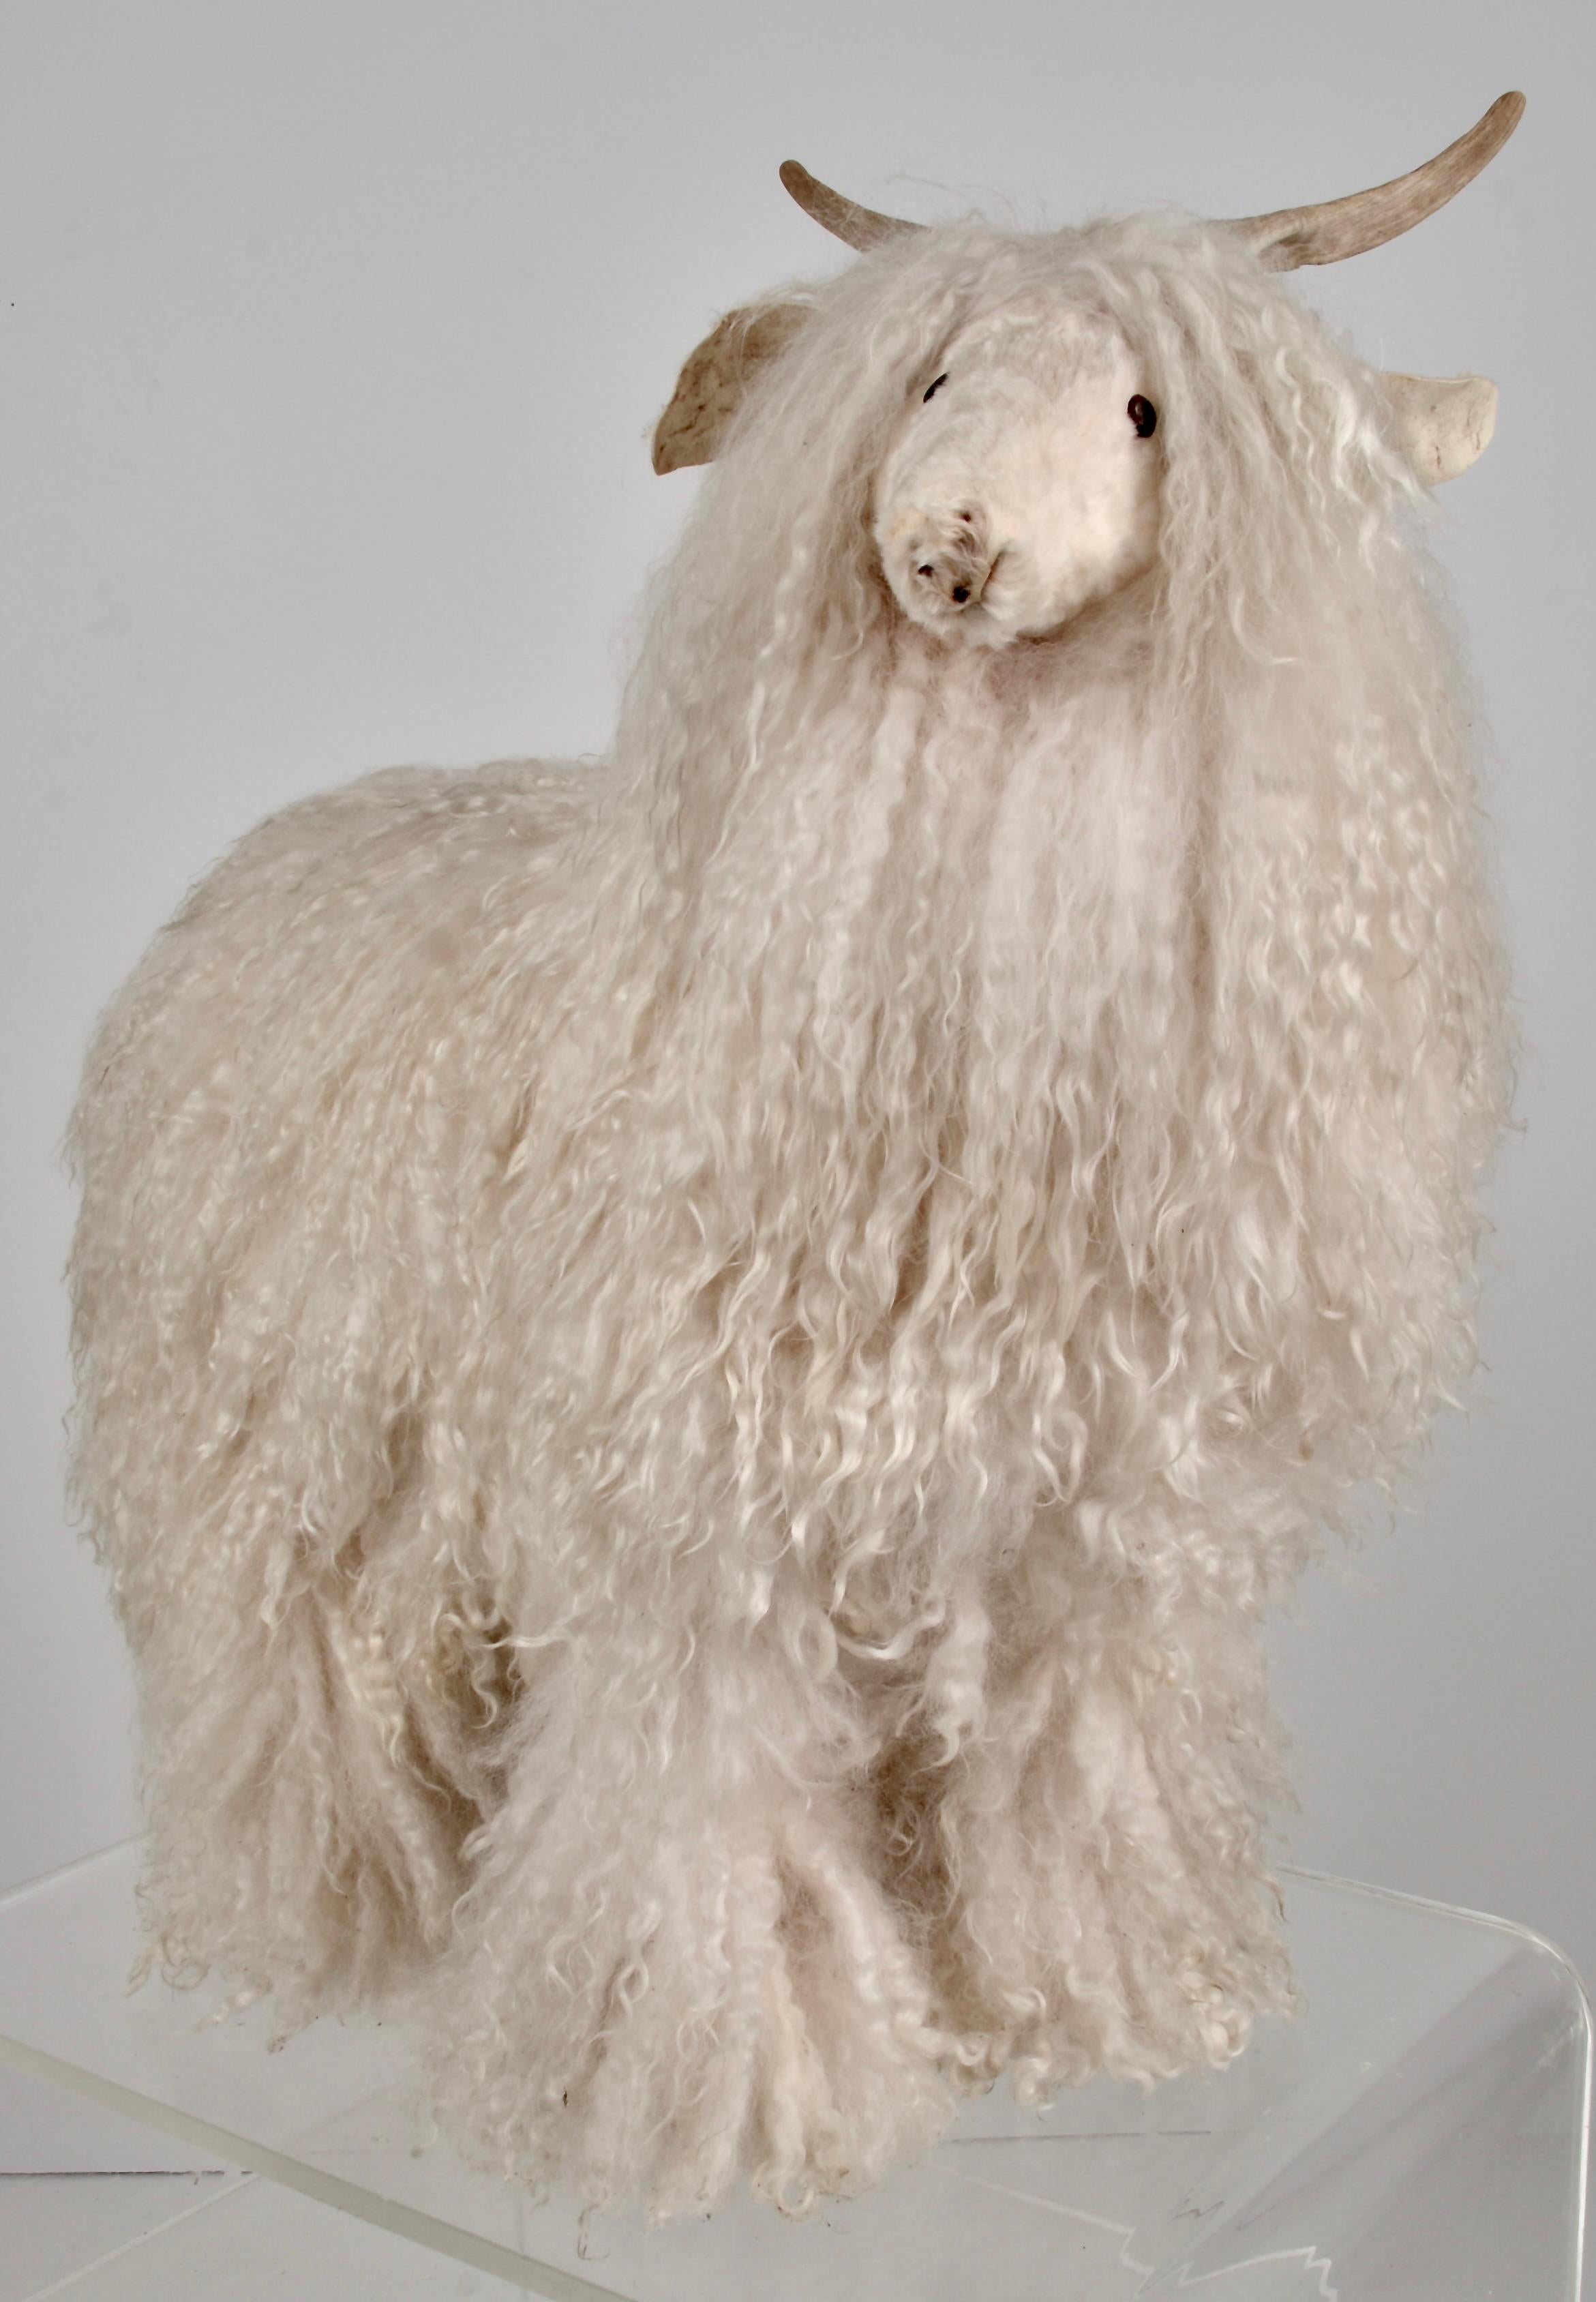 The most charming sheep stool/sculpture we have ever seen. Wonderful quality featuring dense Tibetan wool coat, natural sheep horns and natural leather ears. Sheered lambswool covered face with button eyes in a whimsical, conical shape with great